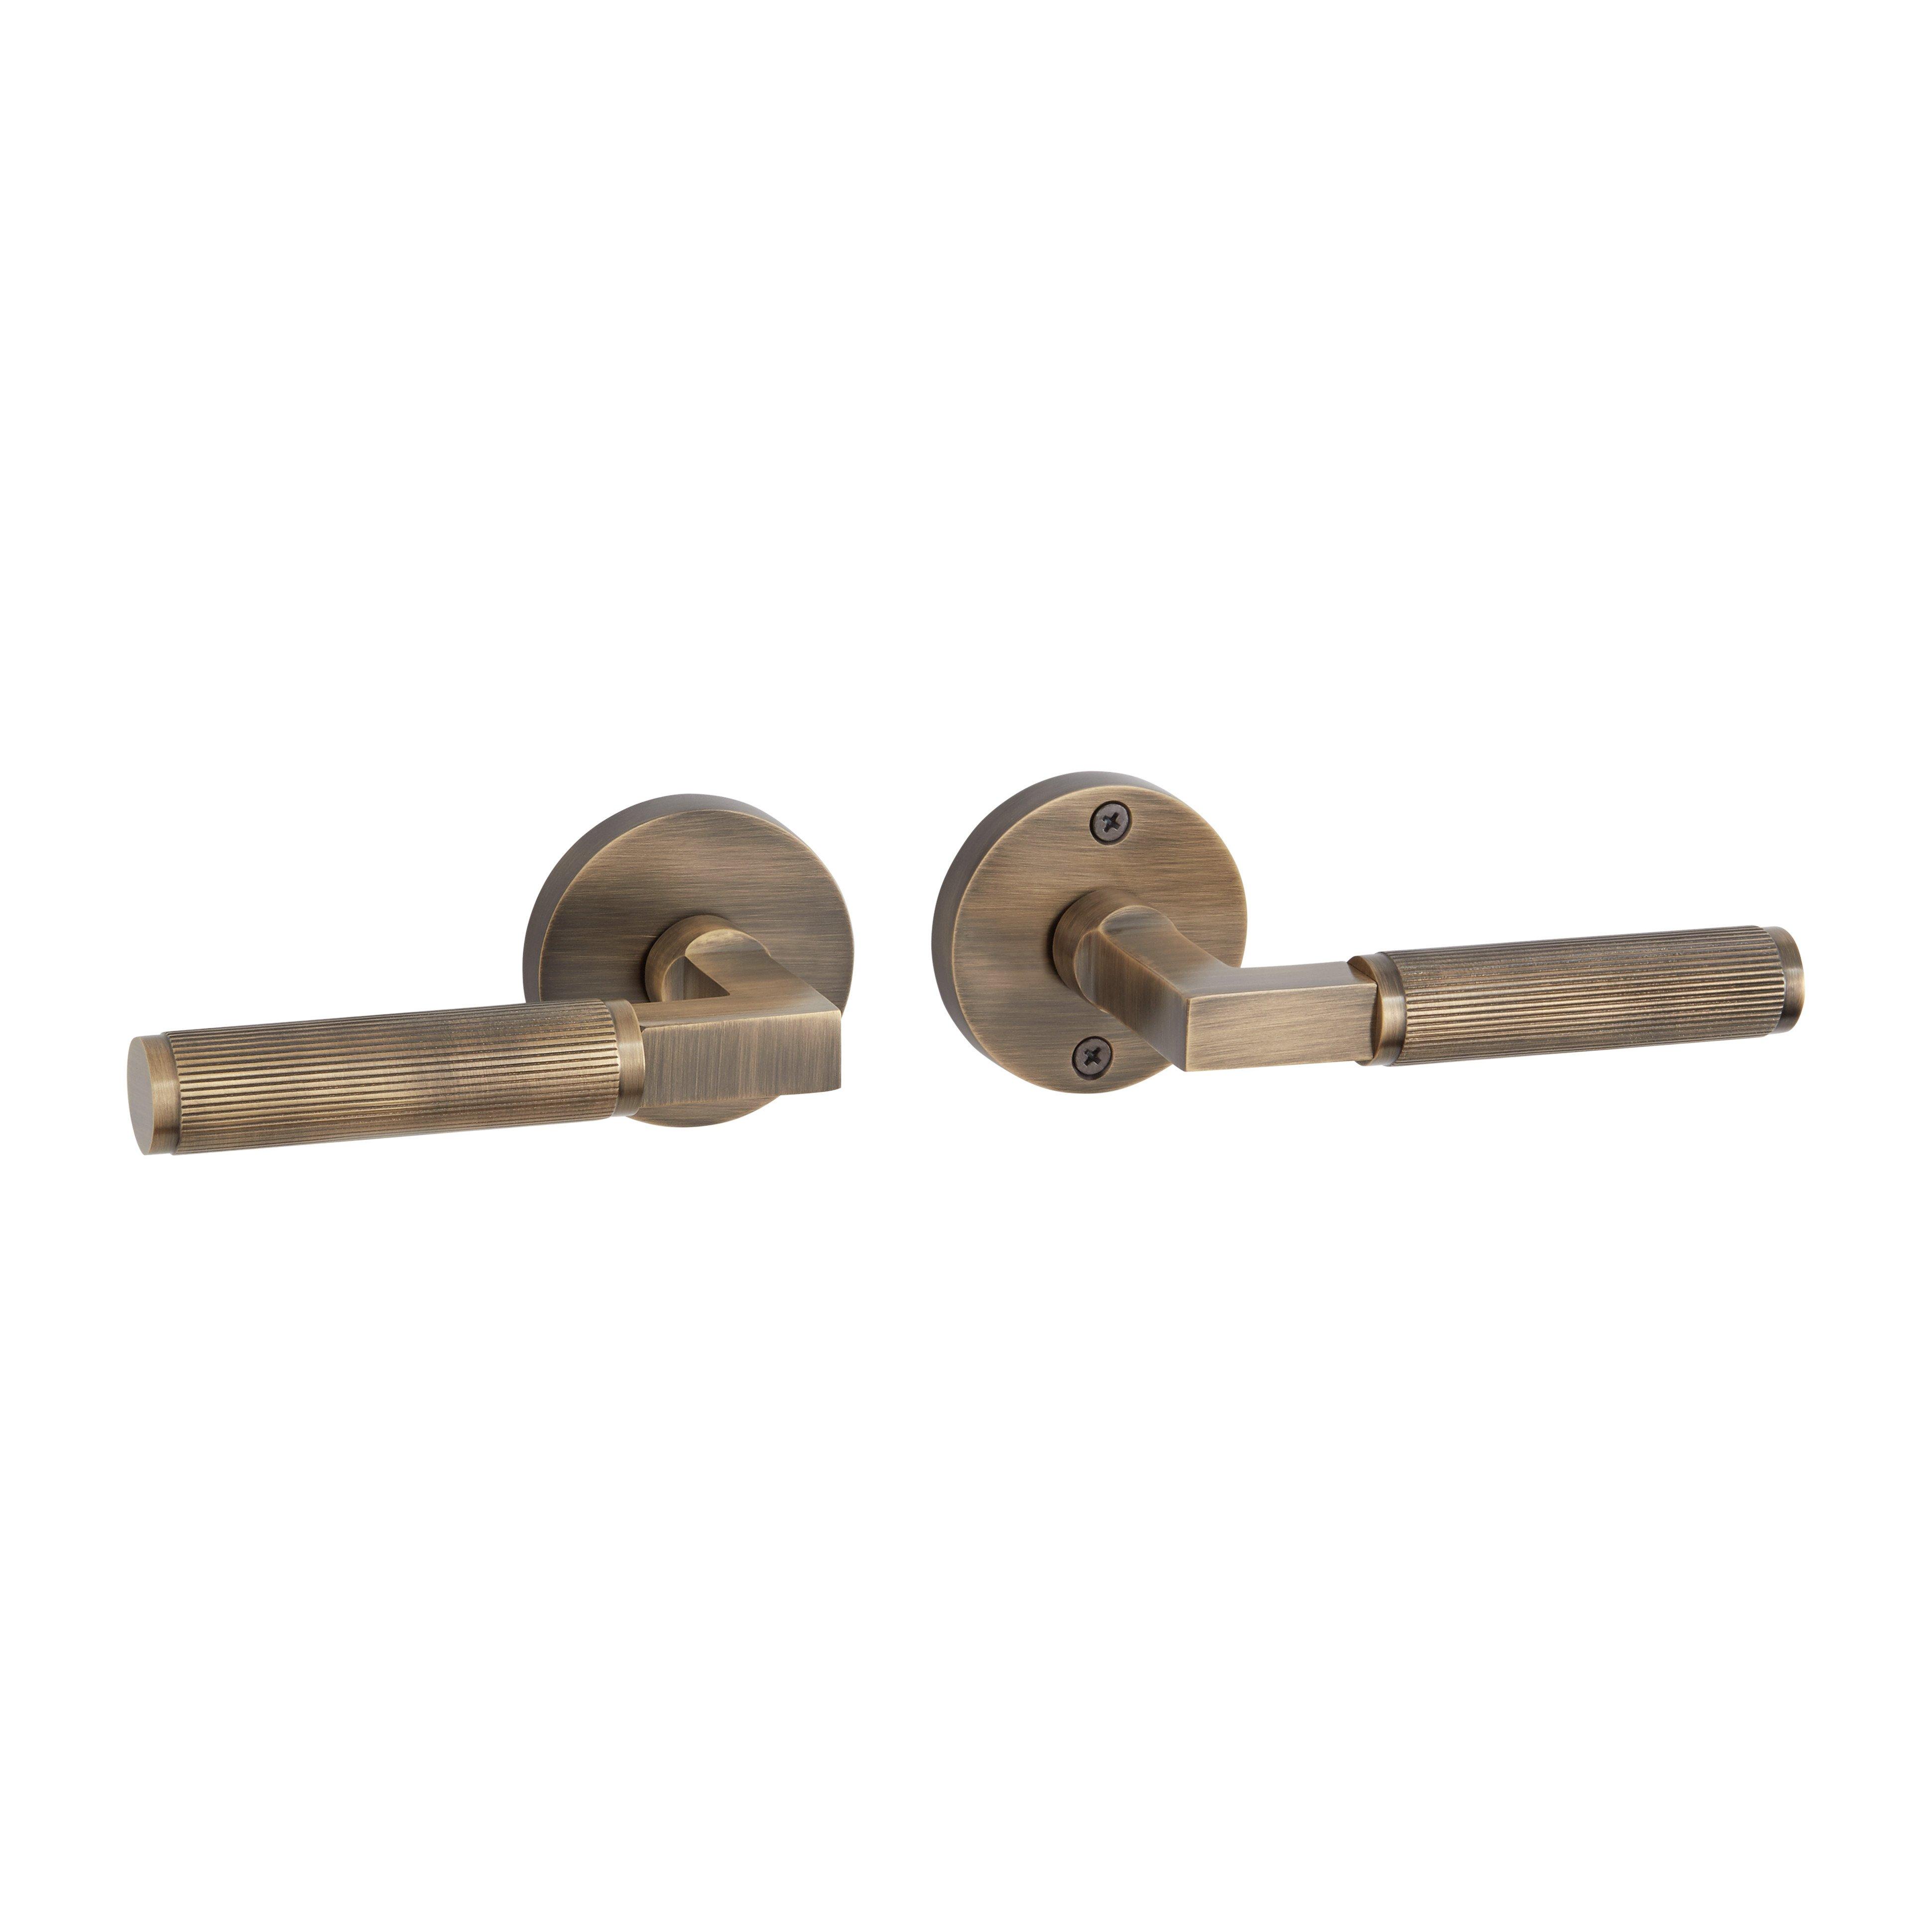 Matt Brass Finished Lever Door Handles, Available in Passage or Privacy Sets